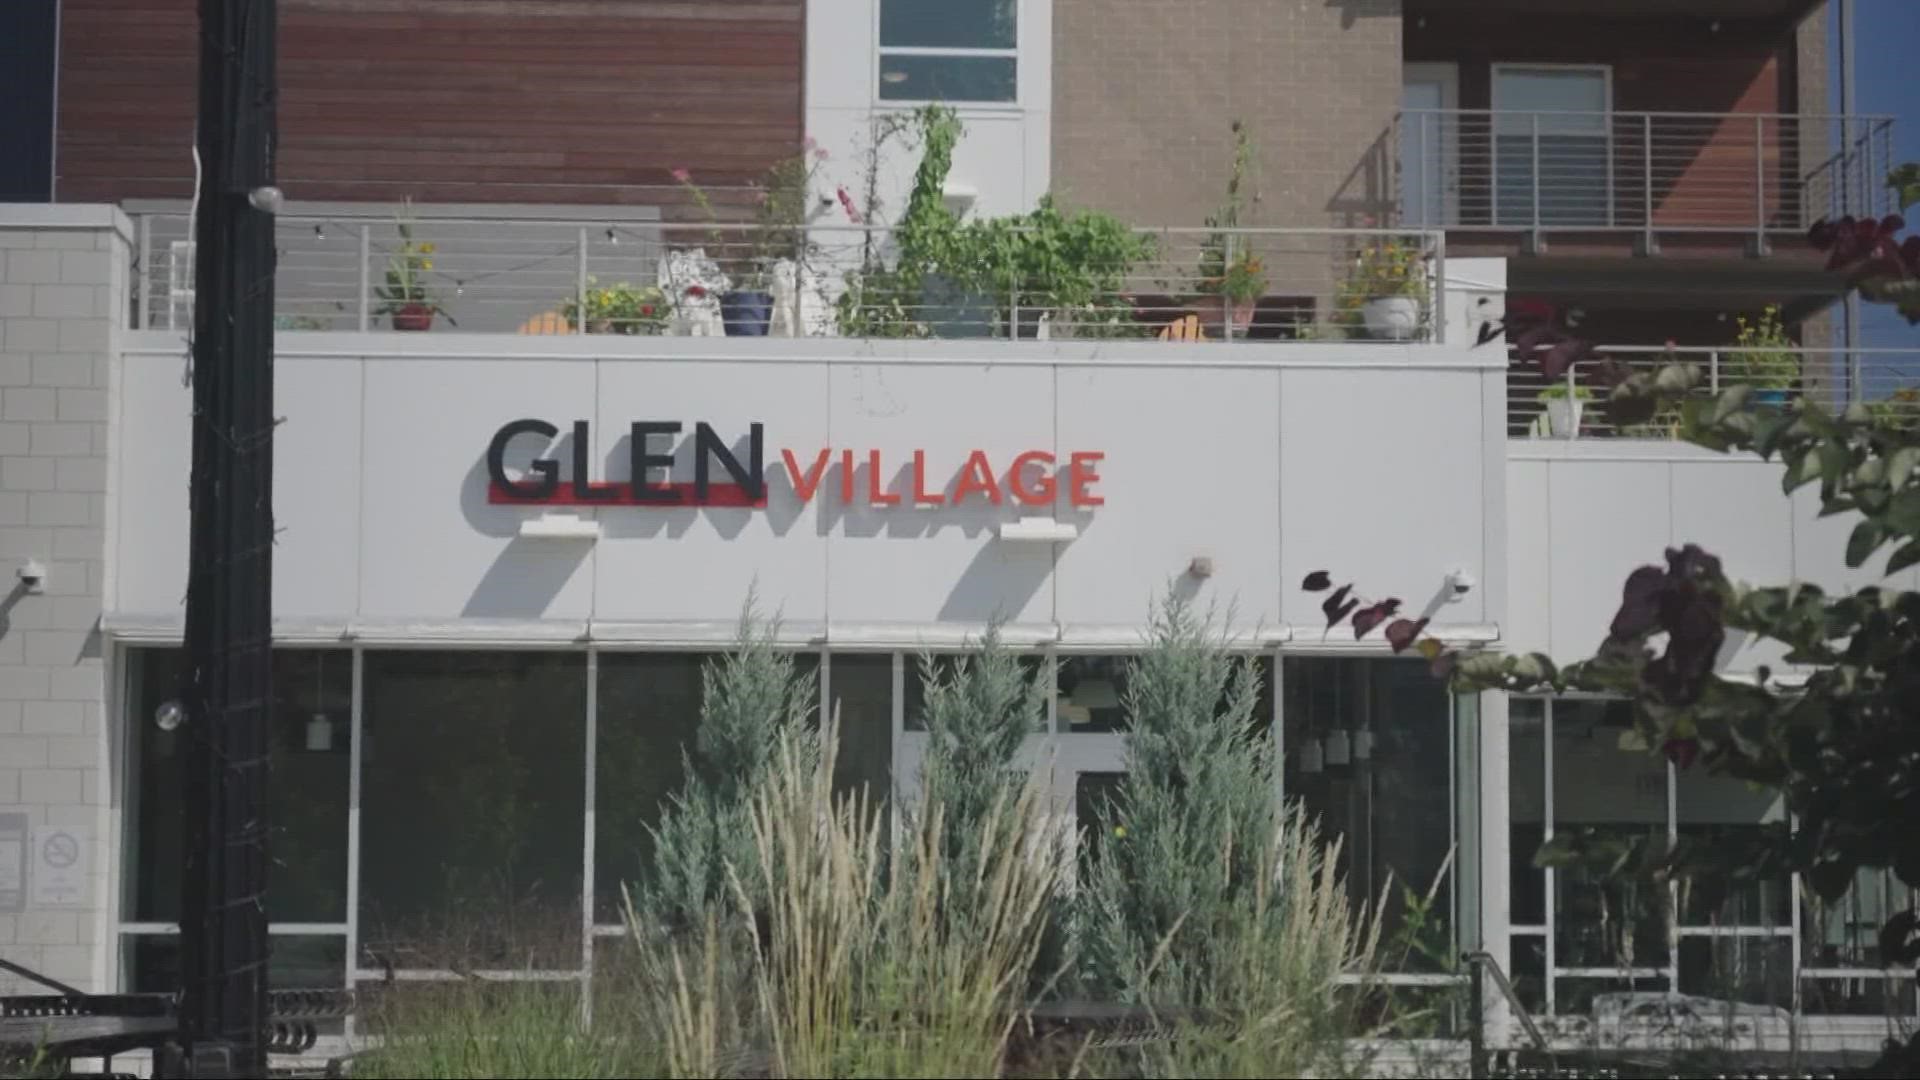 GlenVillage opened in January of 2020 - but early excitement was dampened by pandemic closures. Now, business owners say they need community support to return.